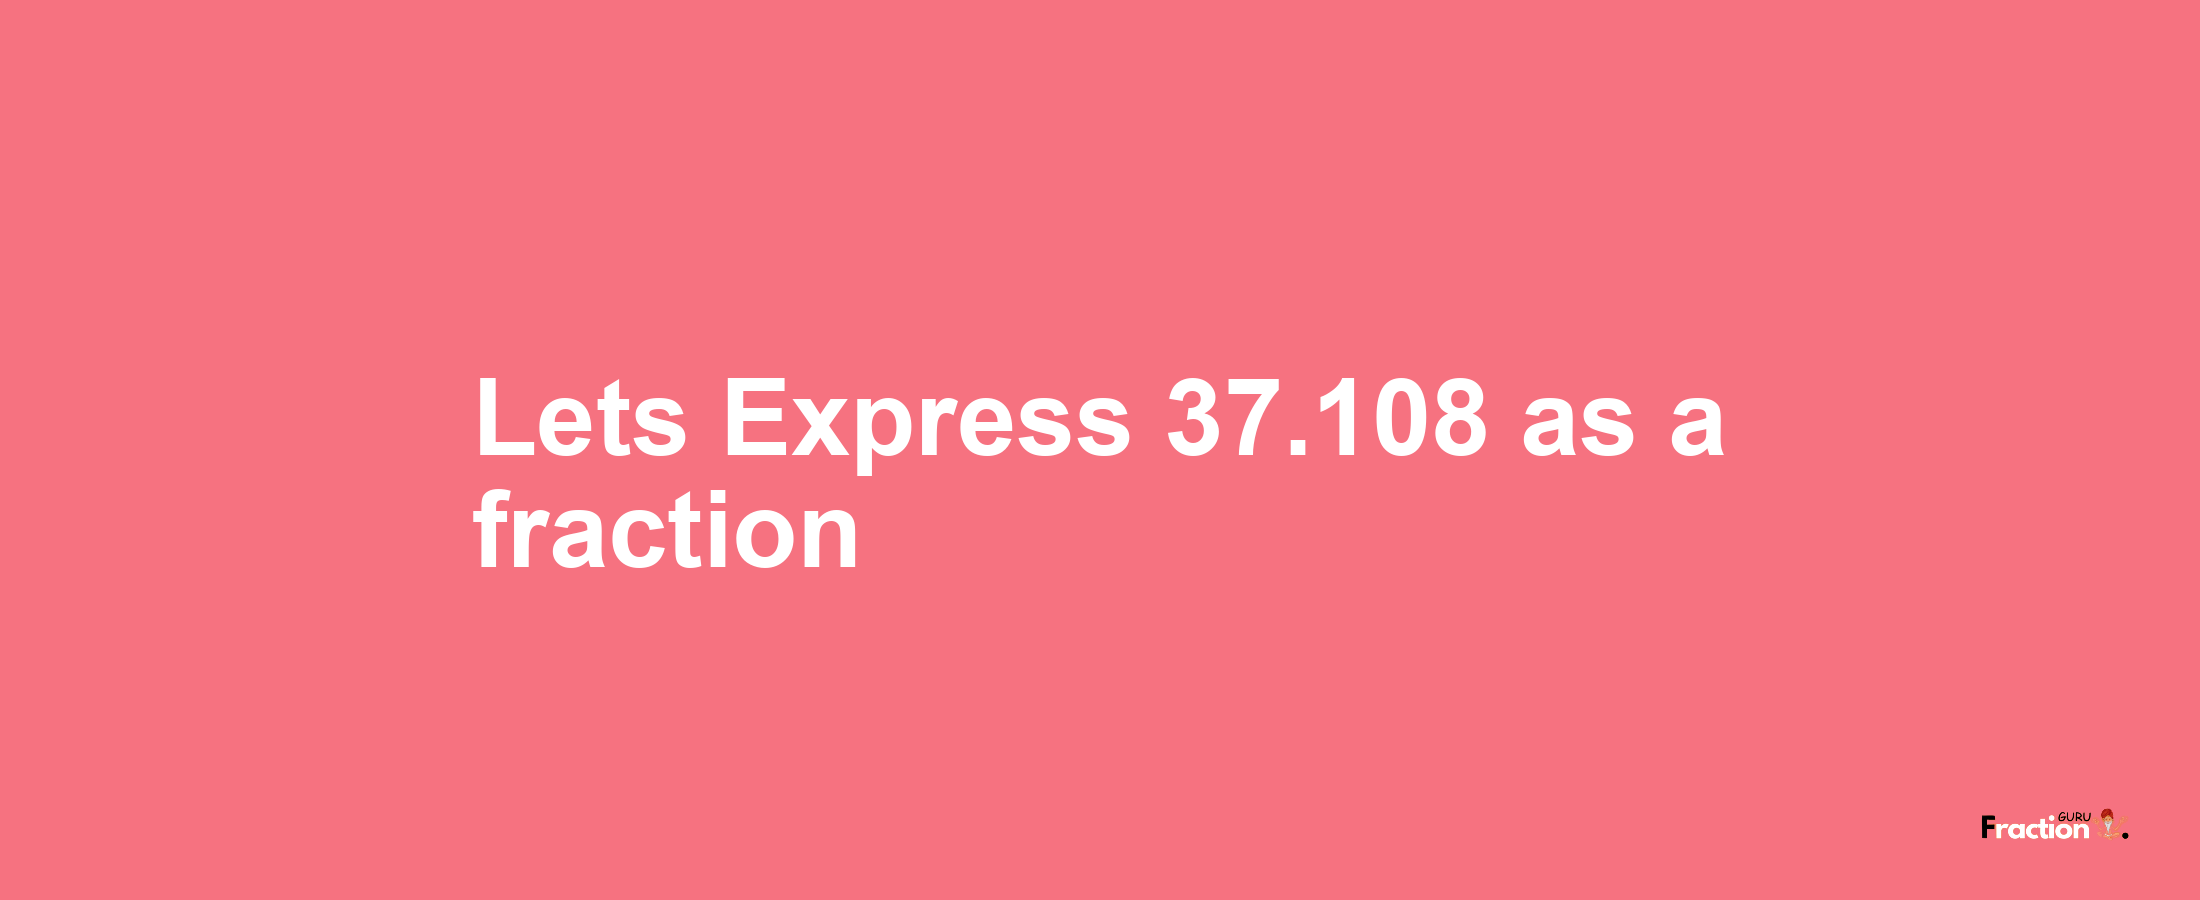 Lets Express 37.108 as afraction